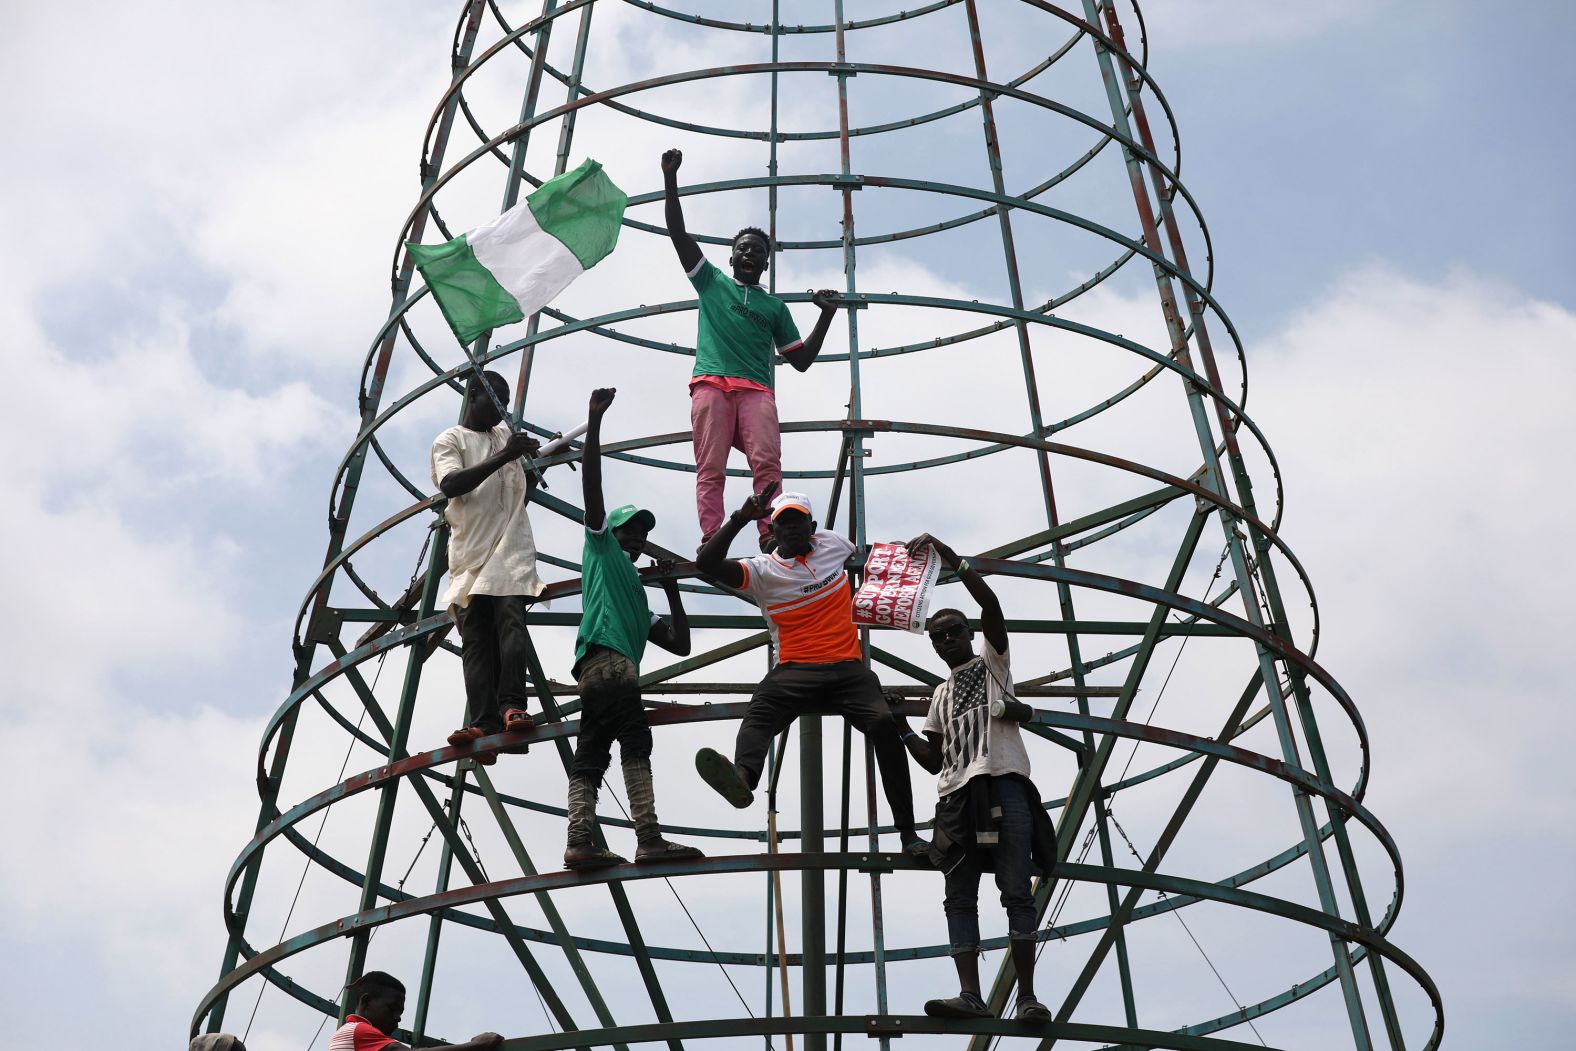 Protesters climb a telecommunications tower during a demonstration in Abuja on Monday, October 19.